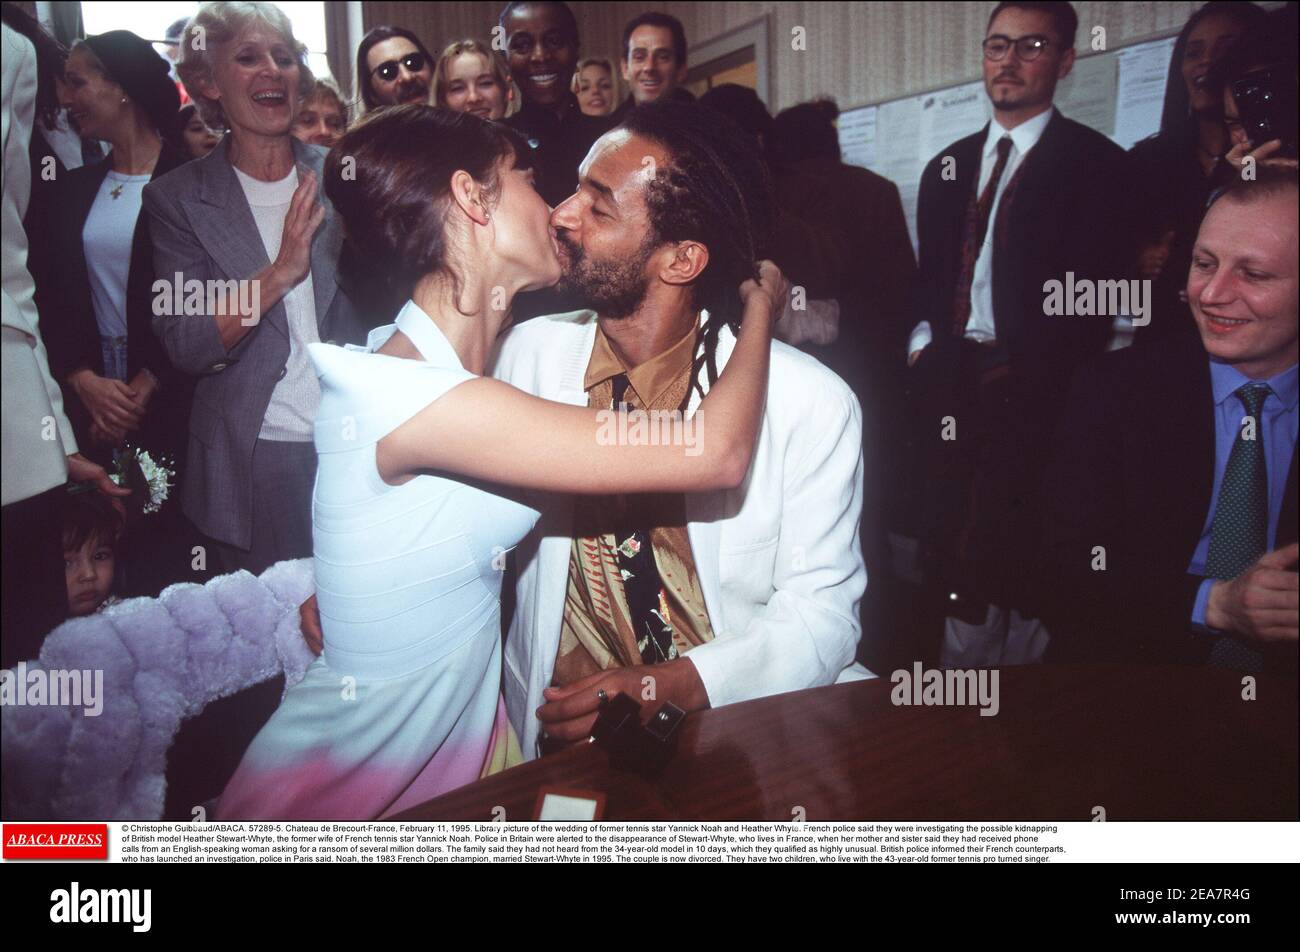 © Christophe Guibbaud/ABACA. 57289-5. Chateau de Brecourt-France, February 11, 1995. Library picture of the wedding of former tennis star Yannick Noah and Heather Whyte. French police said they were investigating the possible kidnapping of British model Heather Stewart-Whyte, the former wife of French tennis star Yannick Noah. Police in Britain were alerted to the disappearance of Stewart-Whyte, who lives in France, when her mother and sister said they had received phone calls from an English-speaking woman asking for a ransom of several million dollars. The family said they had not heard from Stock Photo